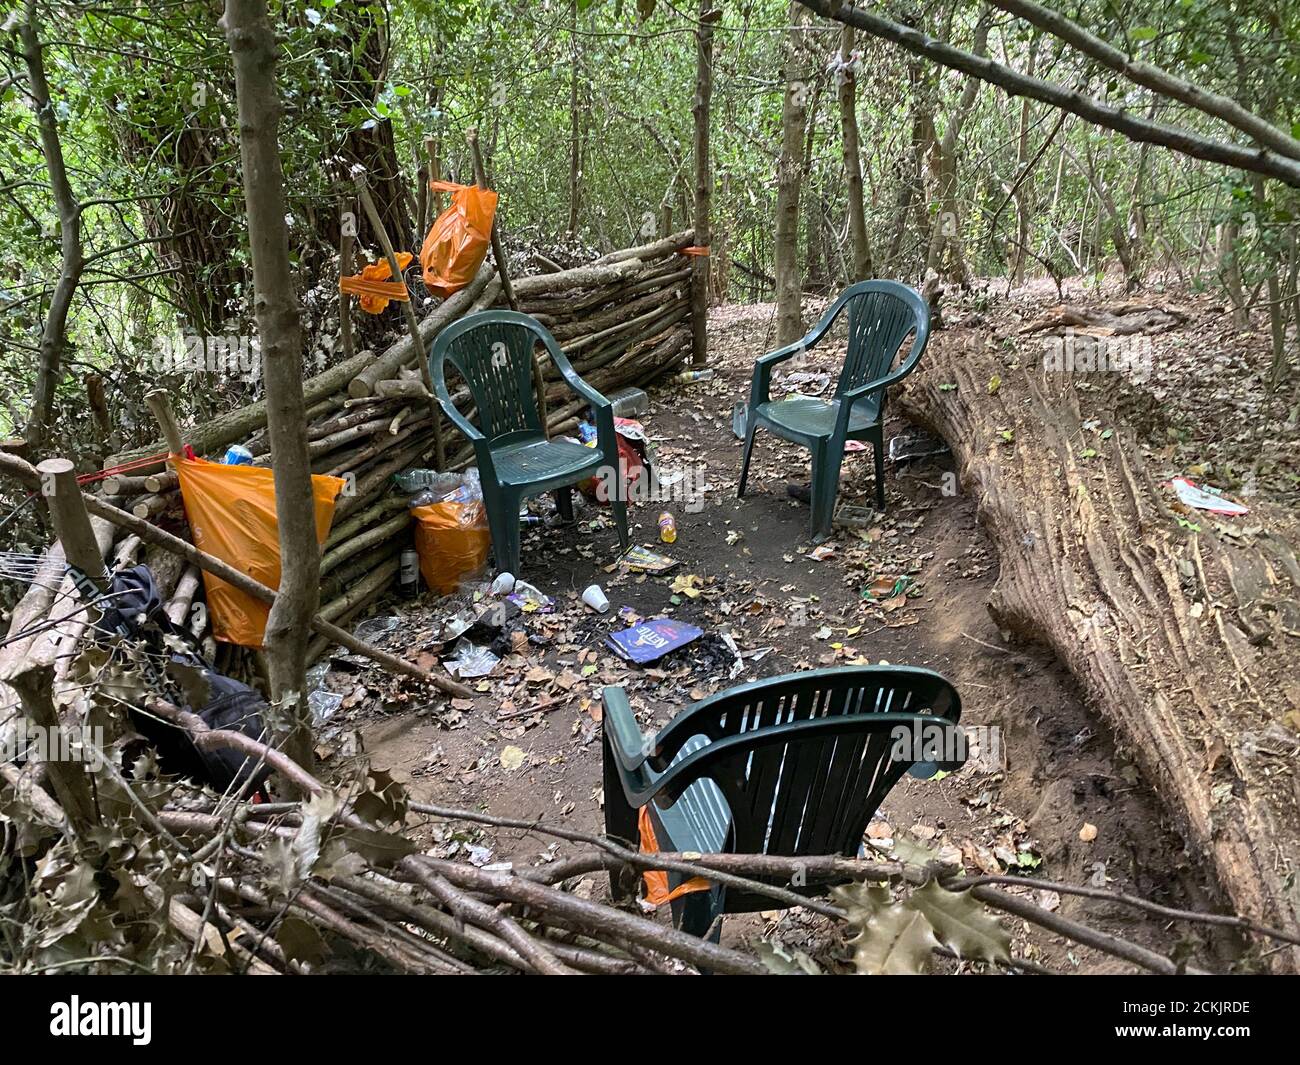 A drug, glue sniffing and alcohol den in woodland near Godalming in Surrey, England. Plastic bags of discarded beer and glue tins litter the countrysi Stock Photo